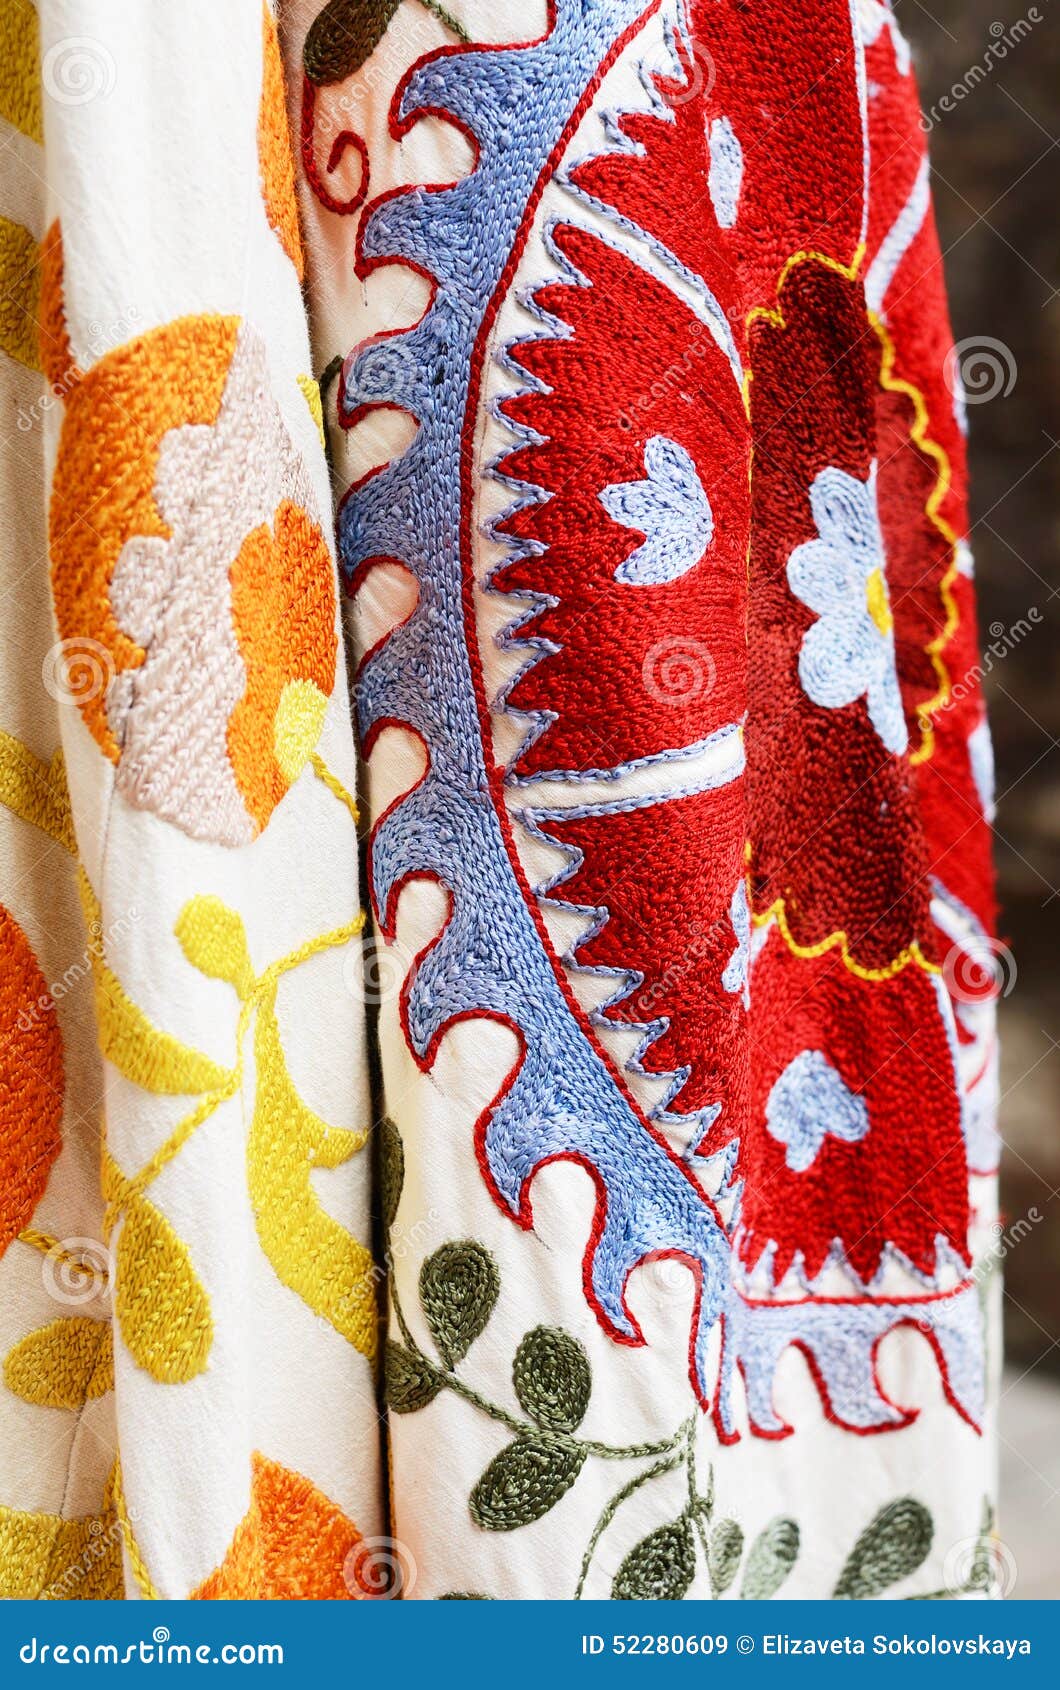 Suzani - Traditional Uzbek Embroidery with Colorful Pattern Stock Image ...